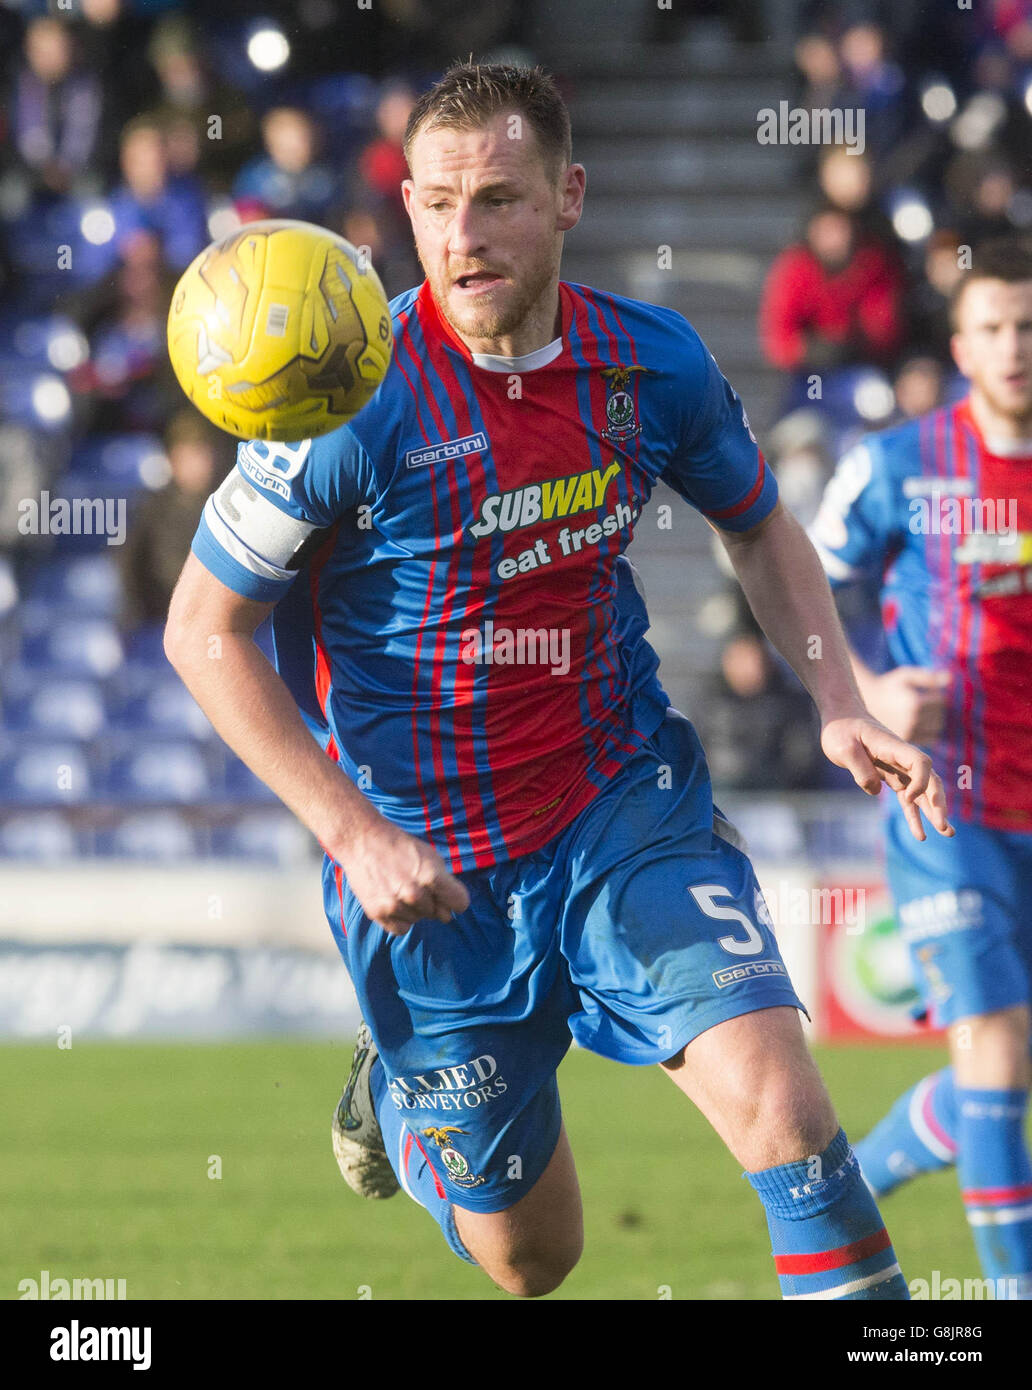 Inverness Caledonian Thistle's Gary Warren during the Ladbrokes Scottish Premiership at Caledonian Stadium, Inverness. PRESS ASSOCIATION Photo. Picture date: Sunday November 29, 2015. See PA story SOCCER Inverness. Photo credit should read: Jeff Holmes/PA Wire. EDITORIAL USE ONLY. Stock Photo